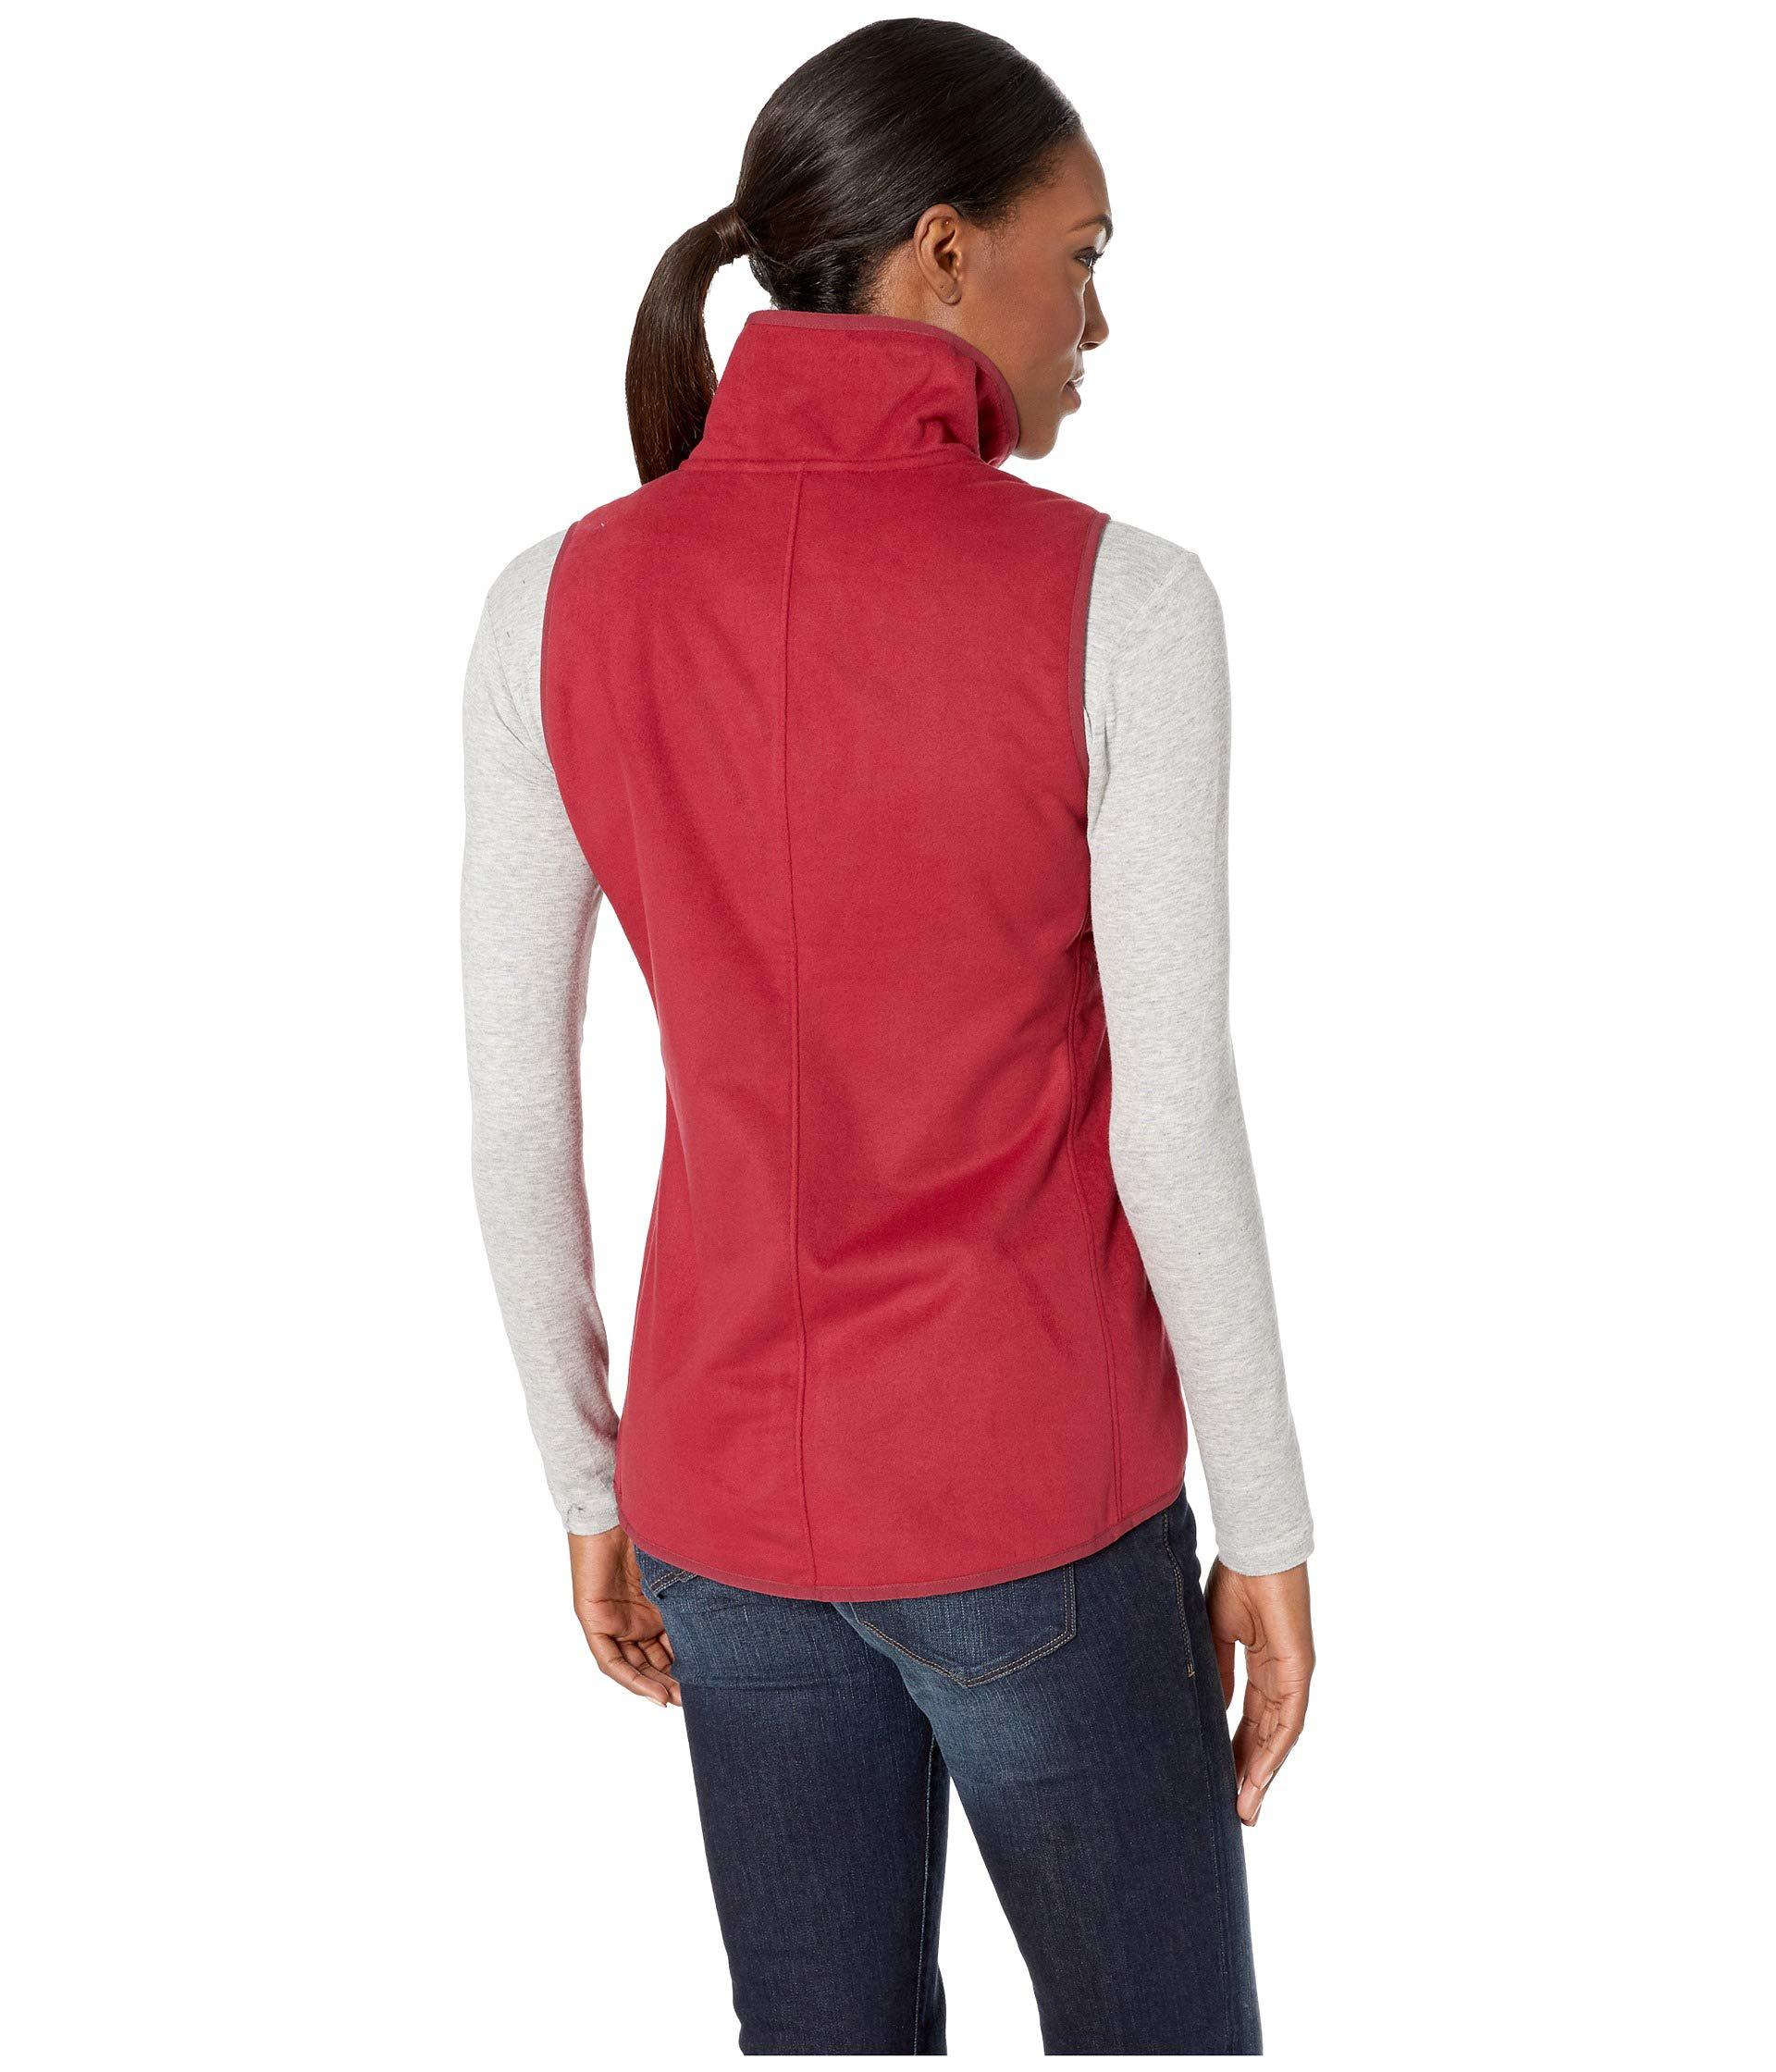 north face mosswood vest